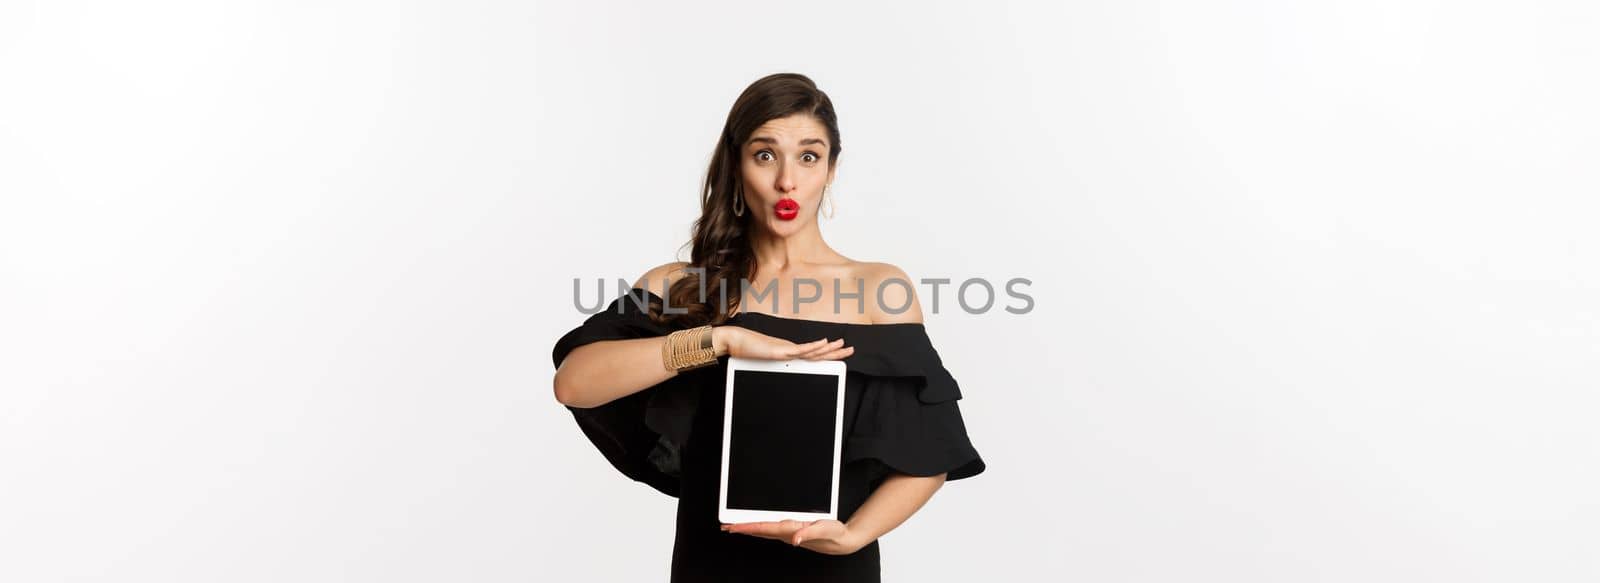 Fashion and shopping concept. Beautiful woman with red lipsticks, black dress, showing tablet screen and looking excited, standing over white background.